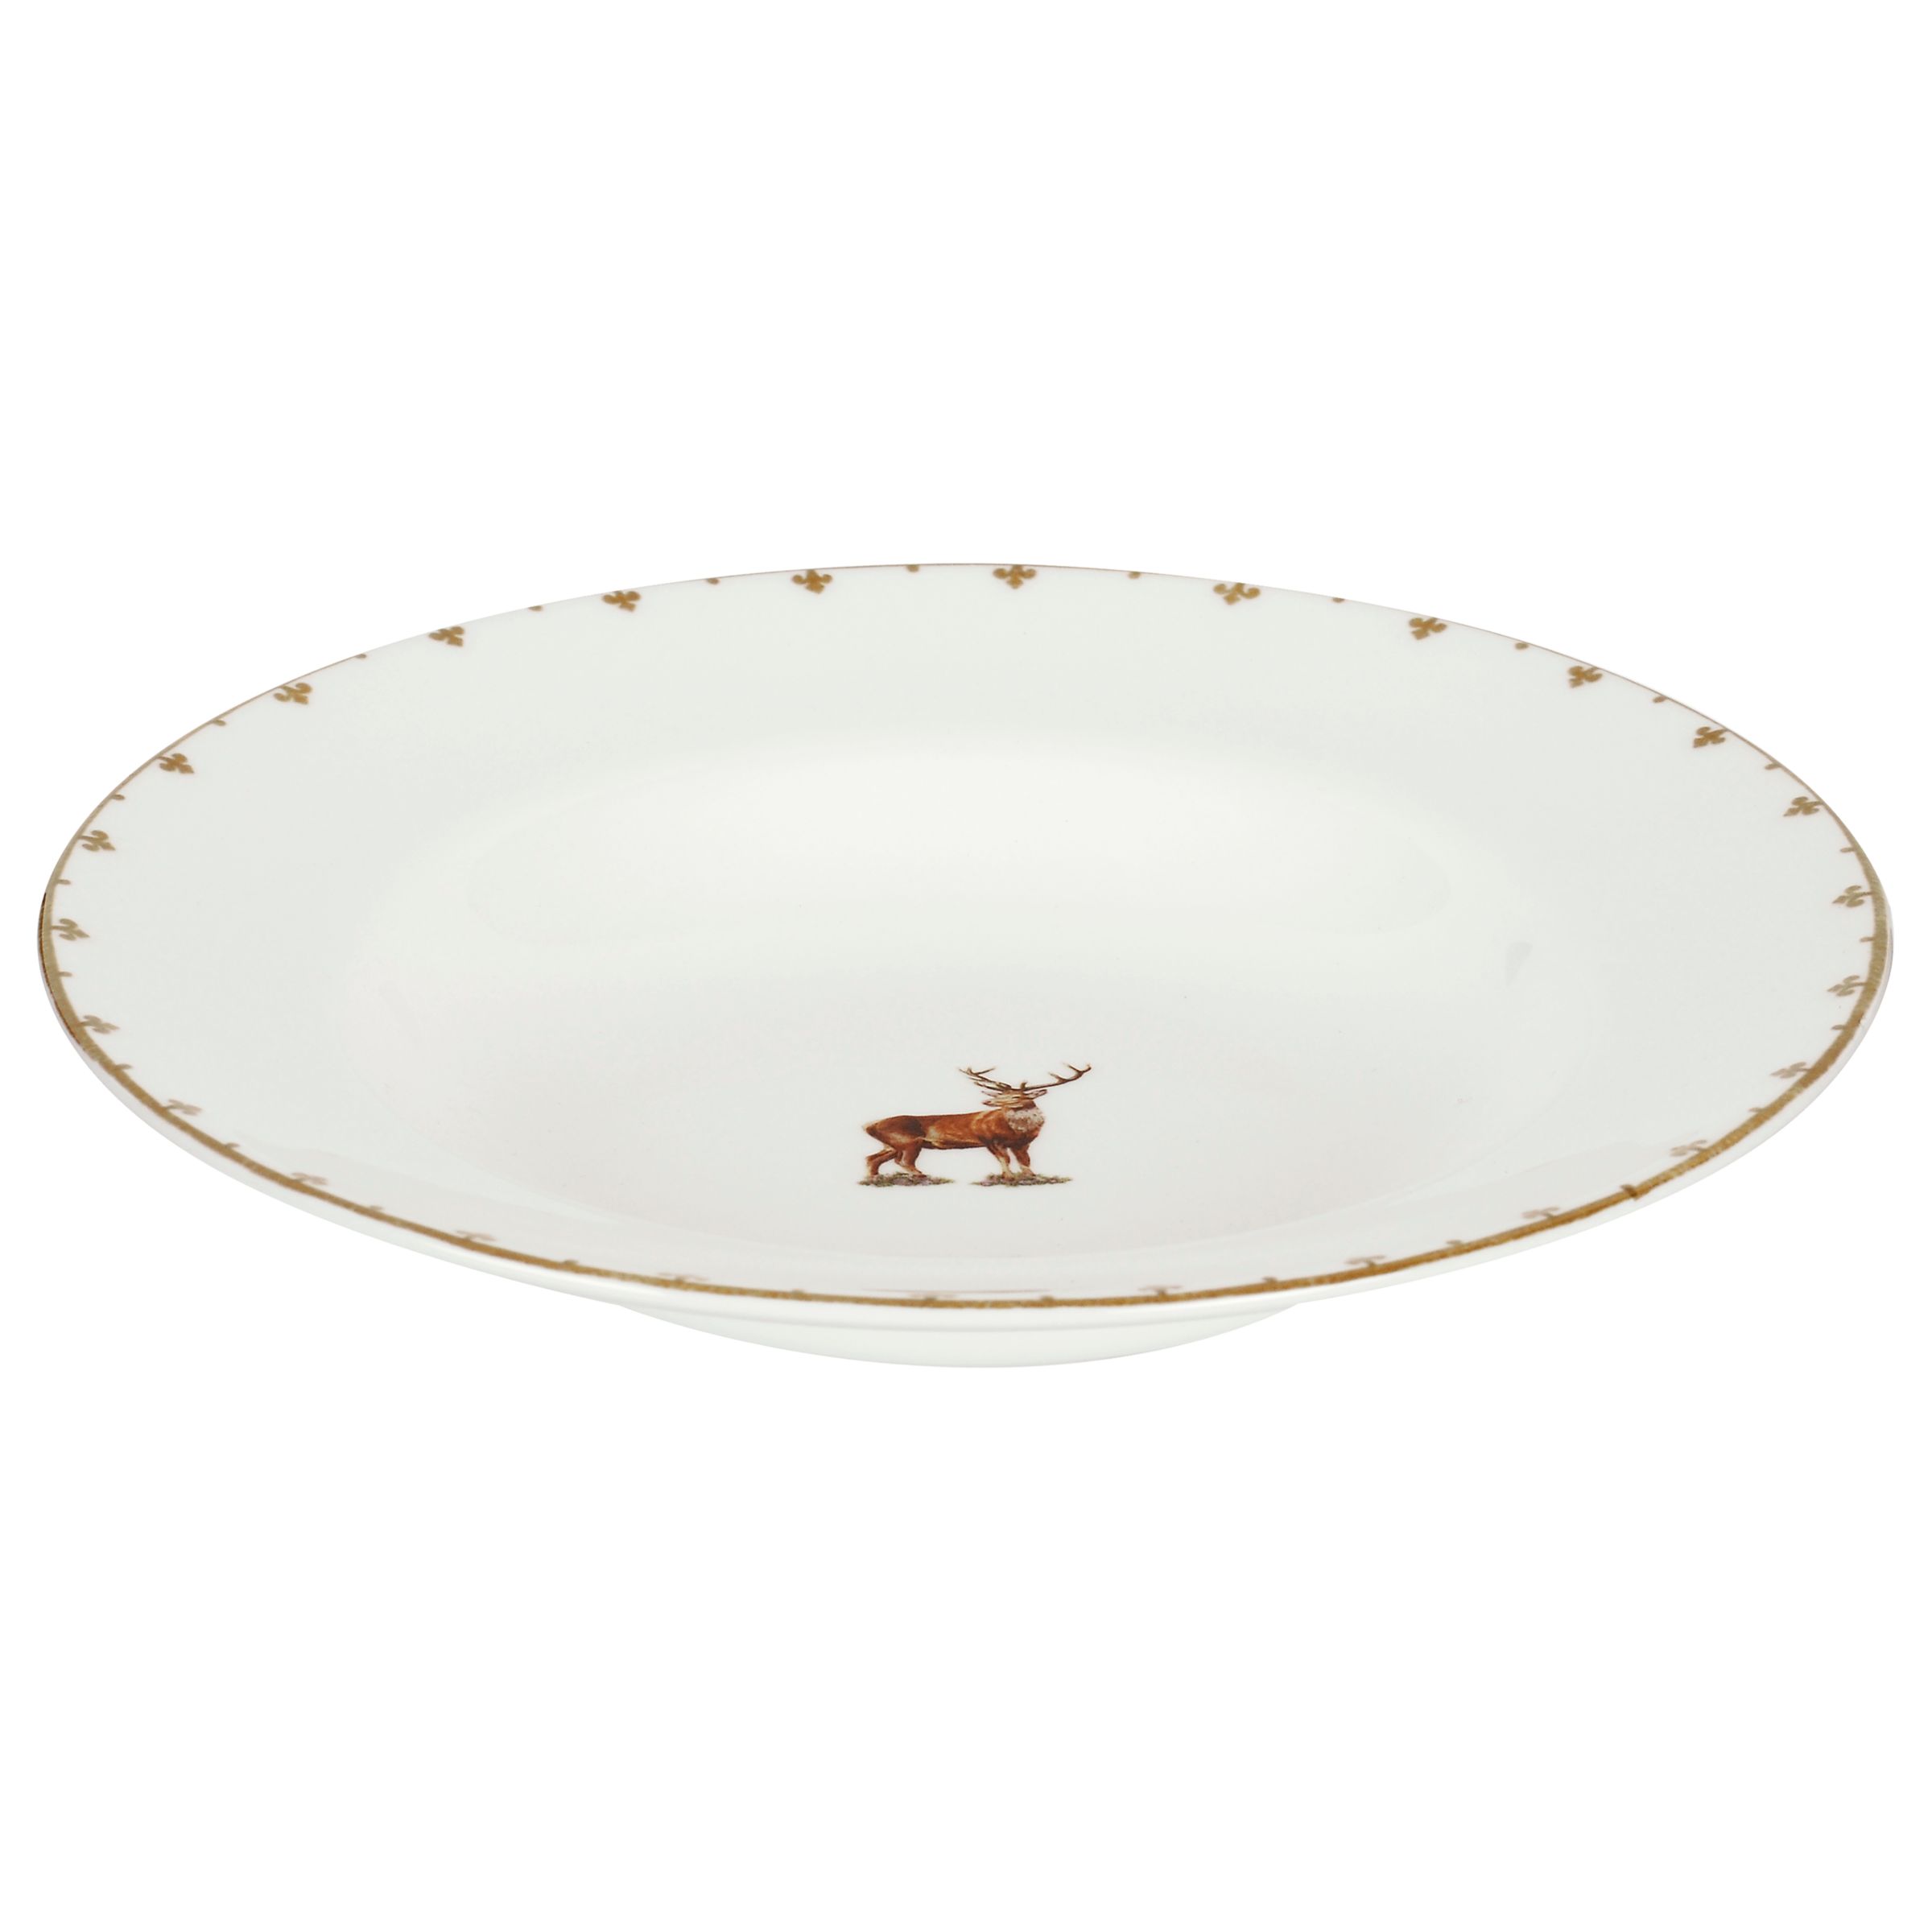 Spode Glen Lodge Stag Soup Plate Review